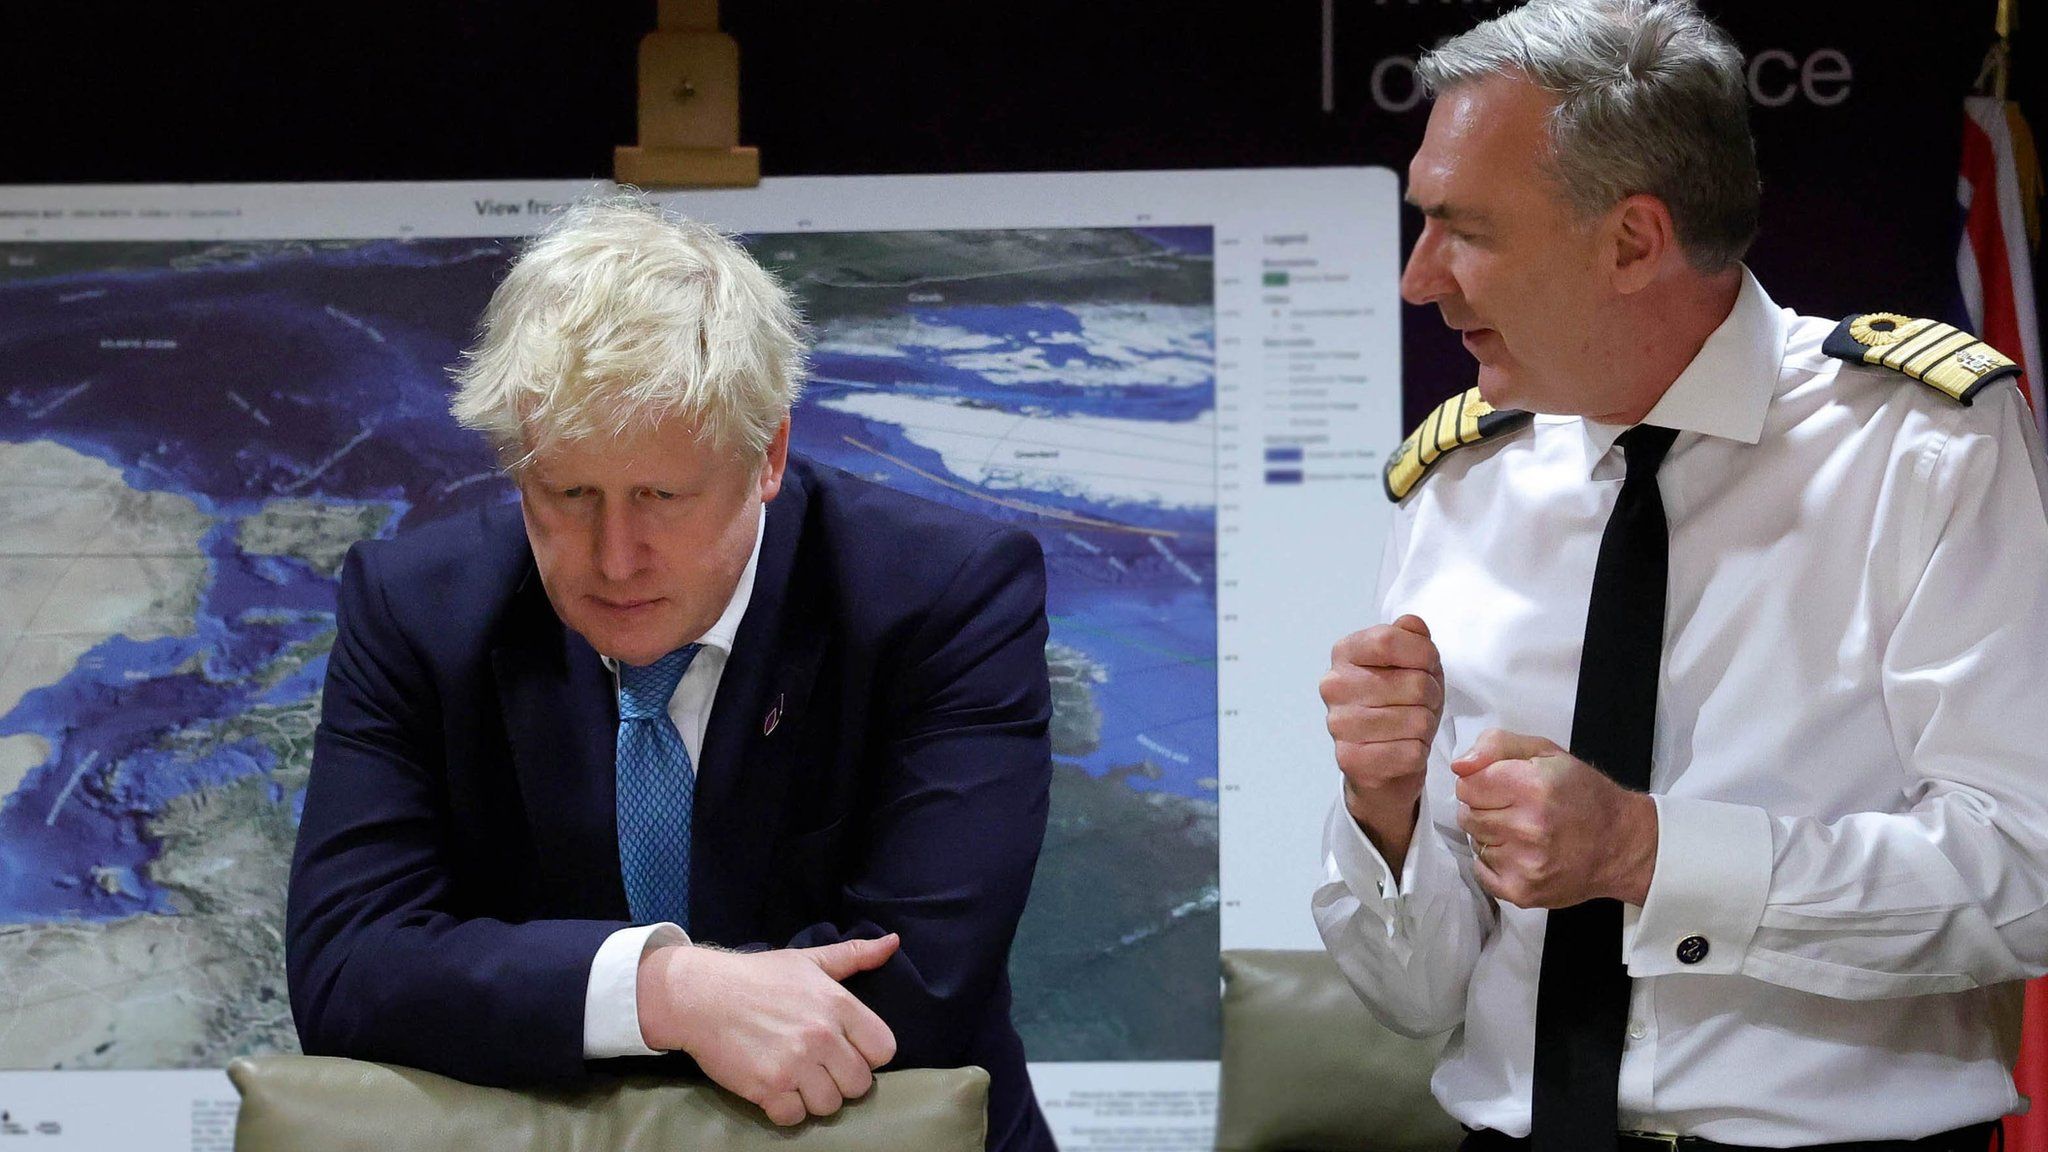 The Prime Minister Boris Johnson being updated on the situation in Ukraine at the Ministry of Defence by the Chief of the Defence Staff Admiral Sir Tony Radakin on 26 January